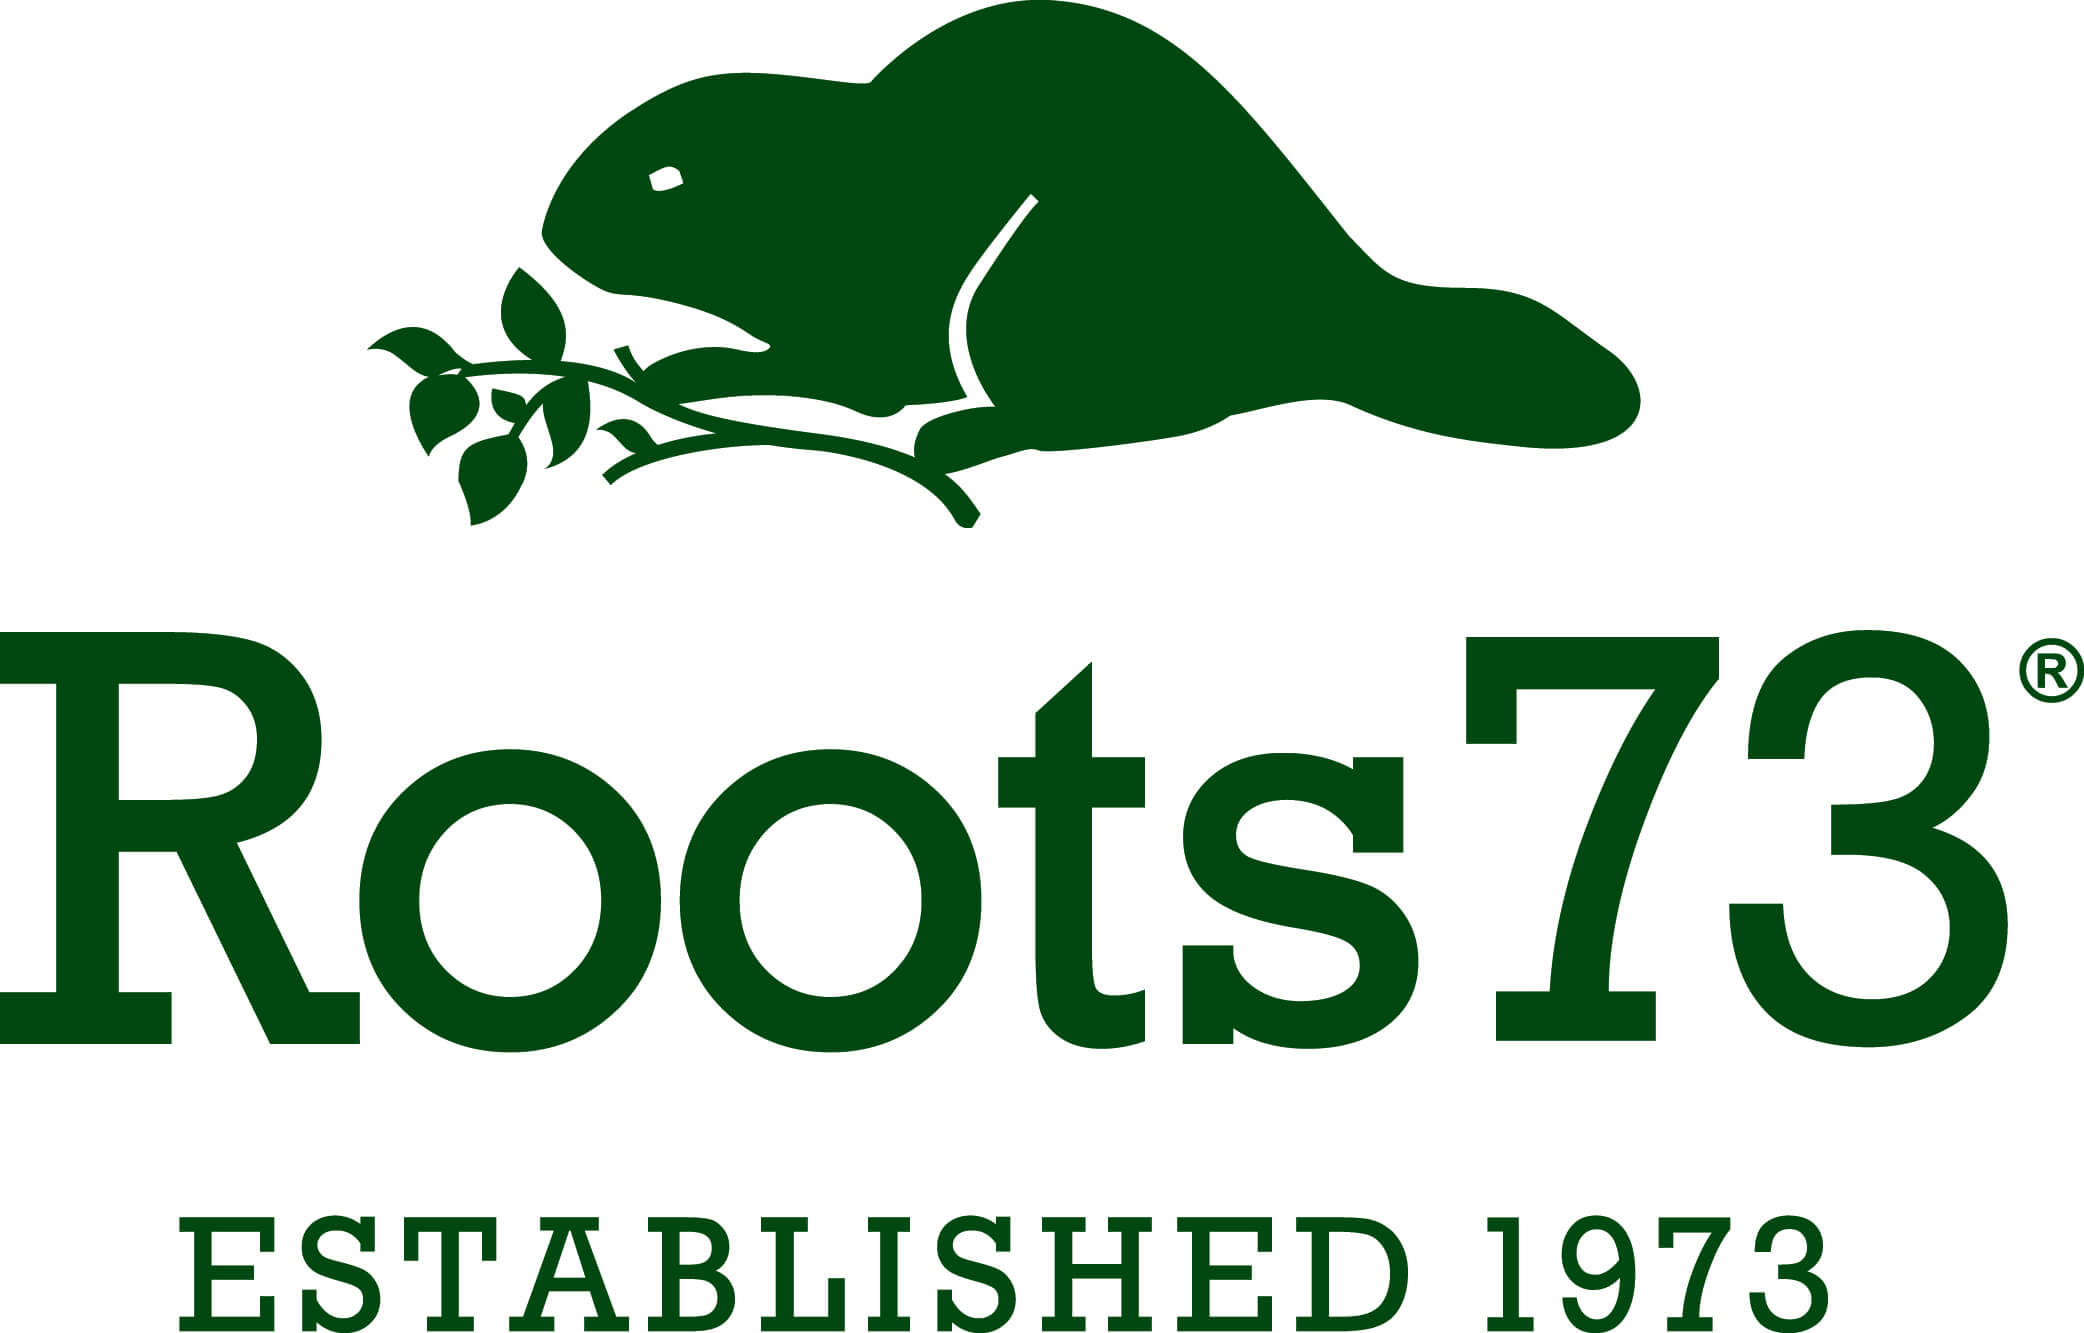 Roots73